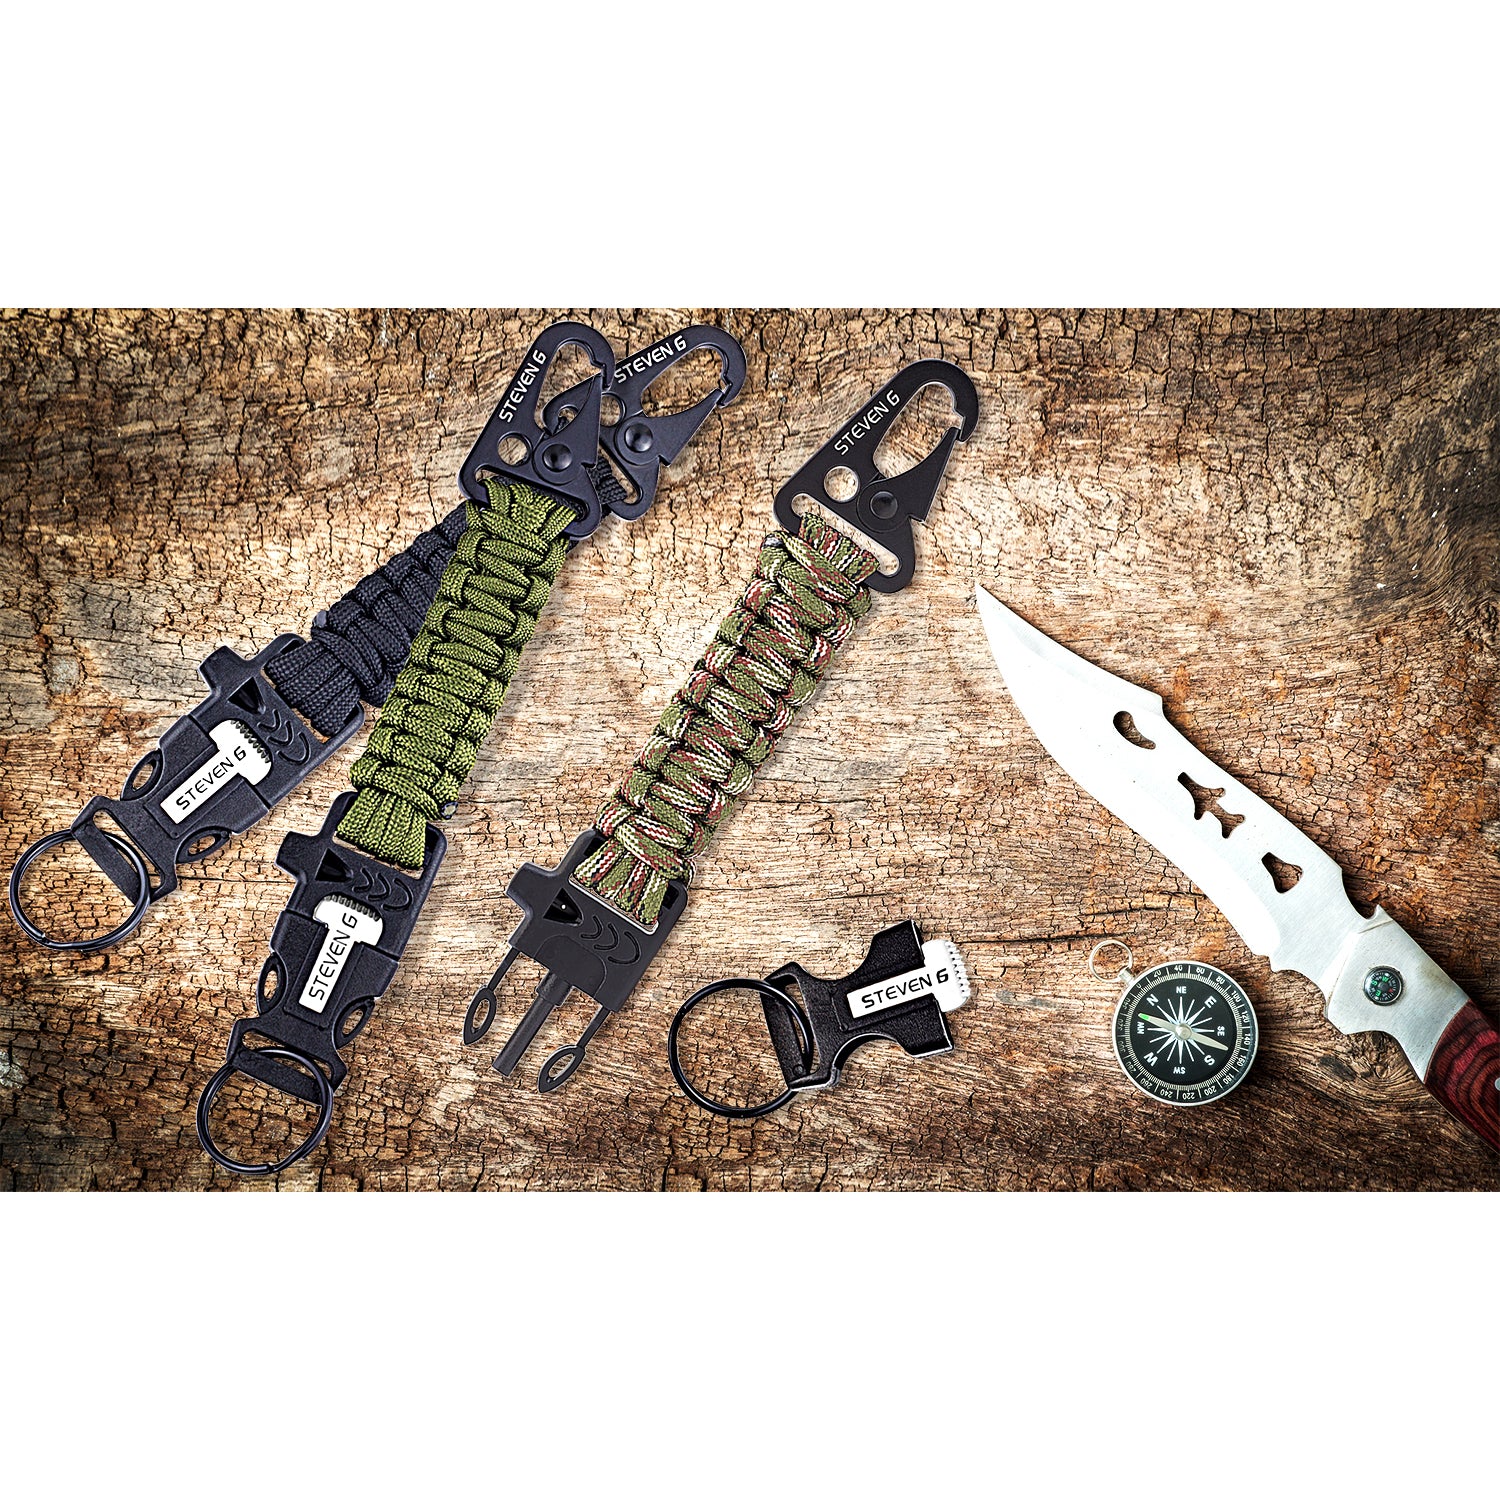 https://cdn.shopify.com/s/files/1/2279/9675/products/3-pieces-Paracord-keychain-for-hiking-hunting-fishing-life-saver_2048x.jpg?v=1619638286